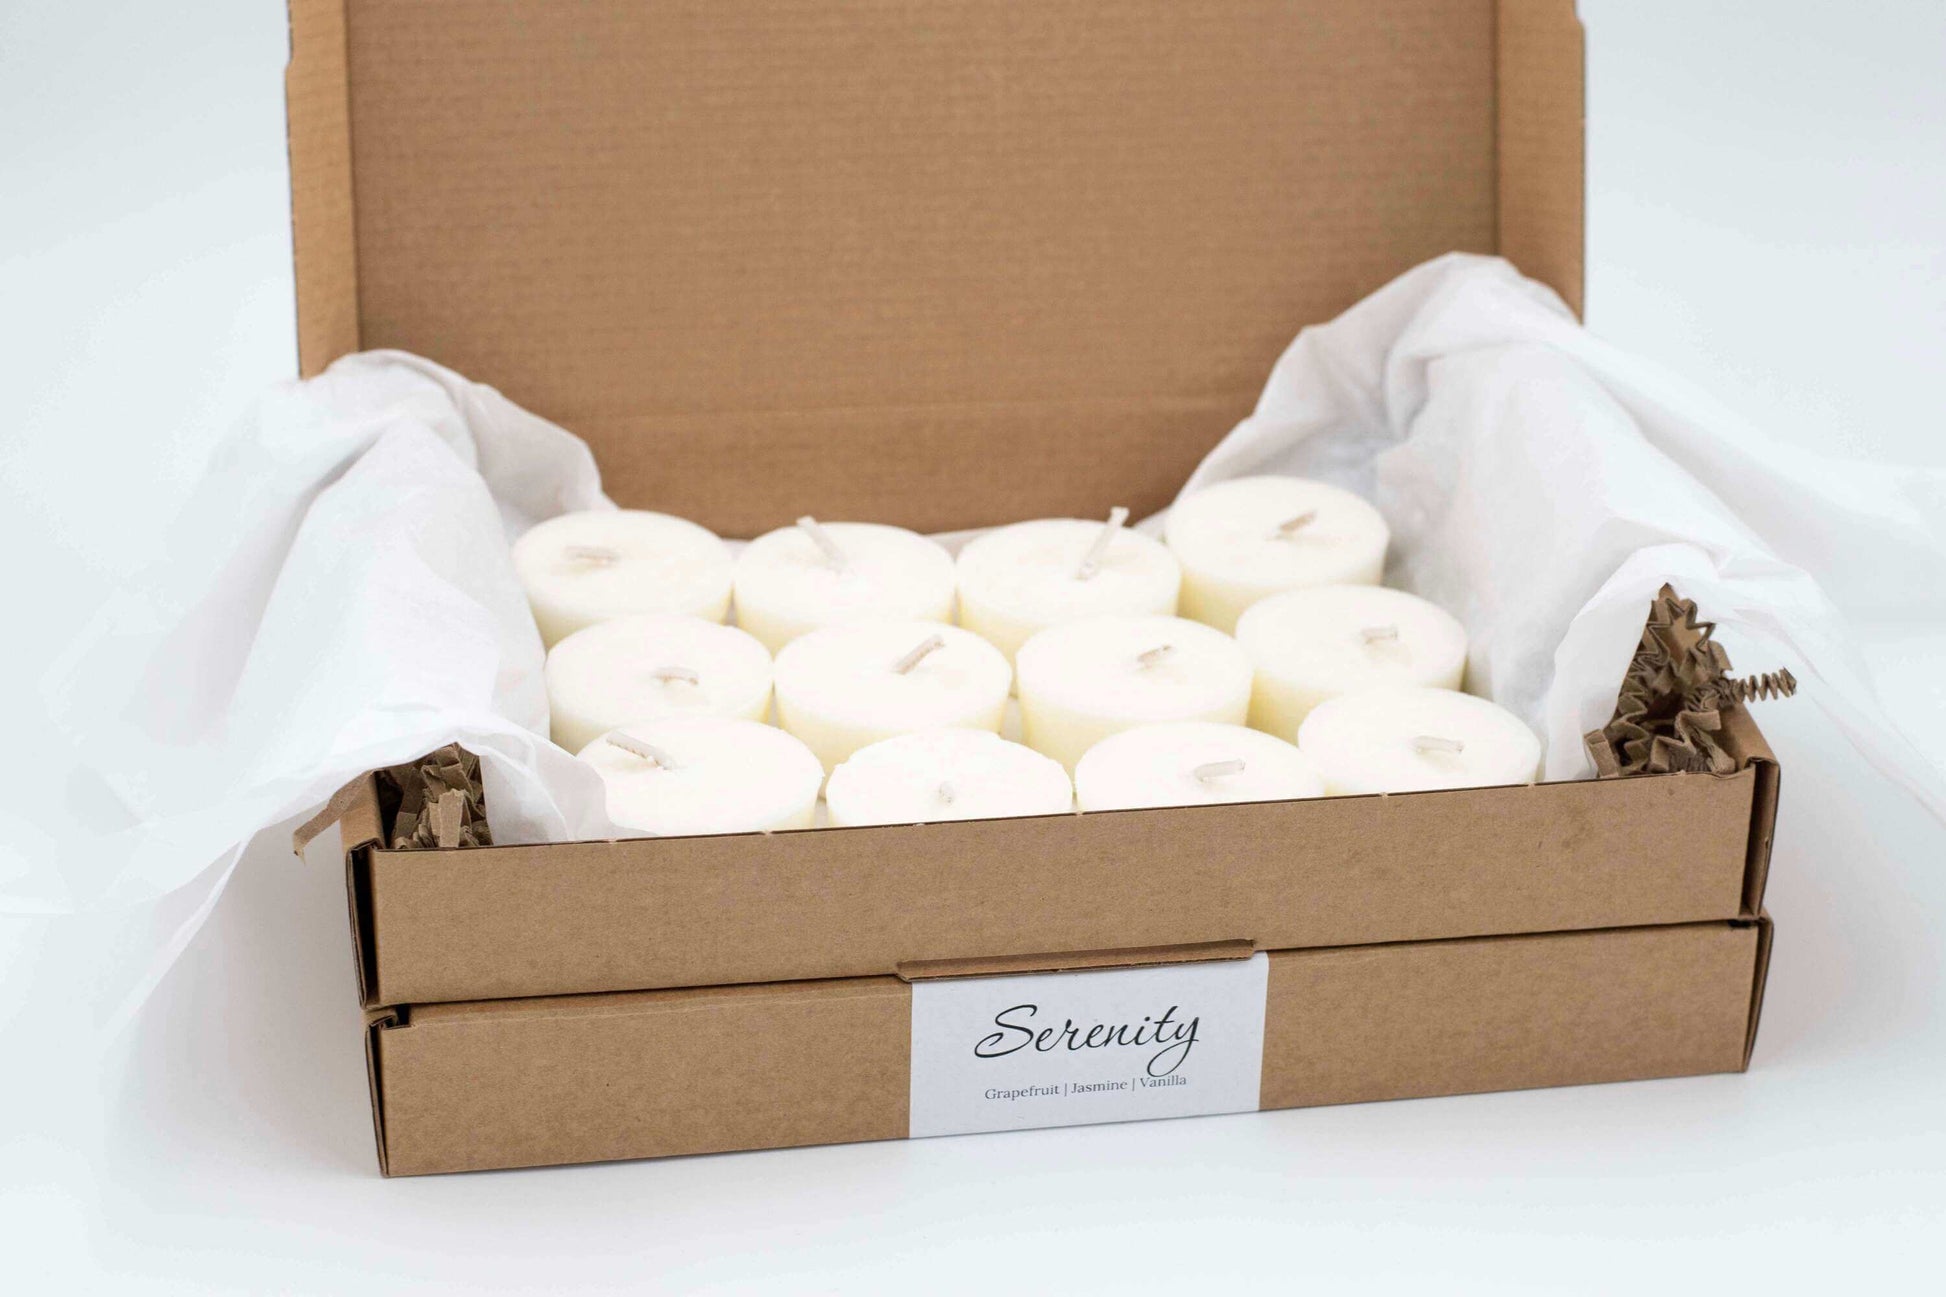 12-pack of Serenity scented tea light candles featuring grapefruit, vanilla, and jasmine, eco-friendly, vegan, and refillable, in a cardboard box